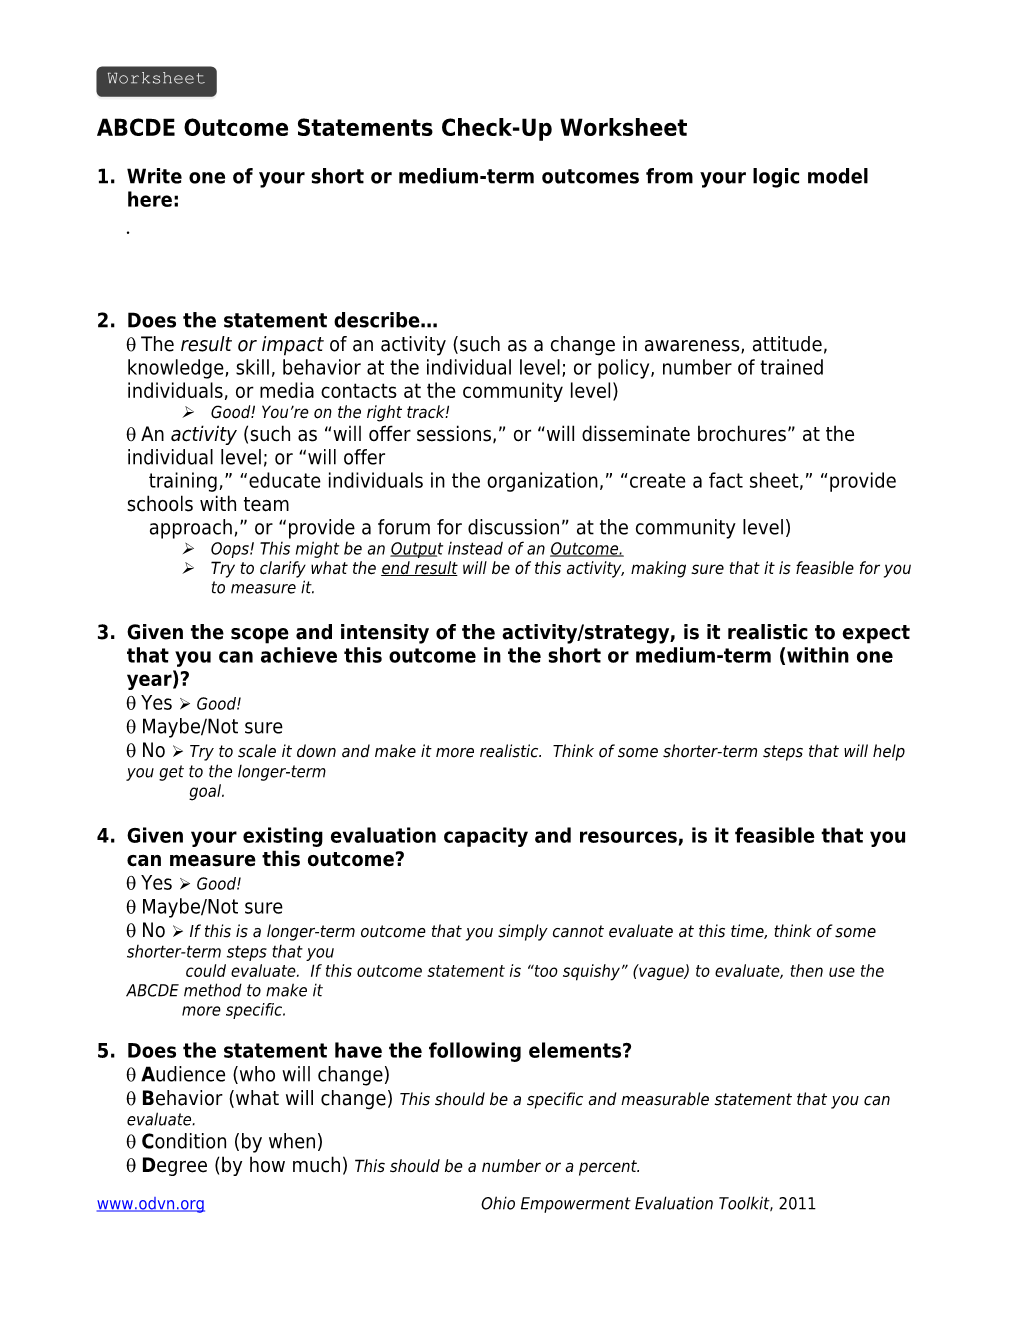 ABCDE Outcome Statements Check-Up Worksheet